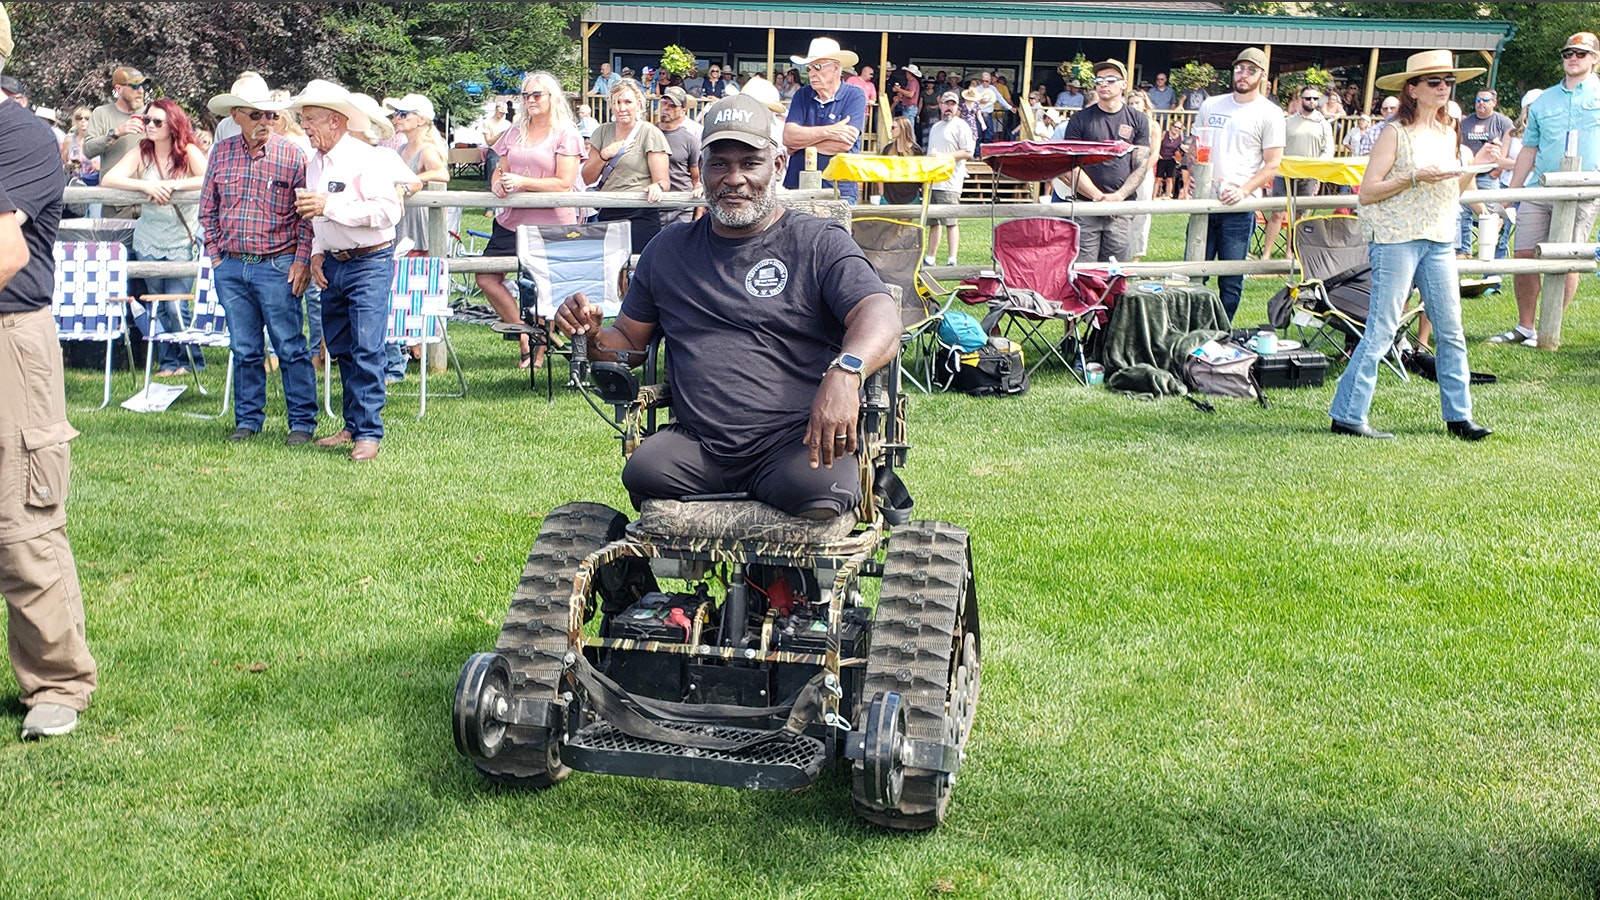 Gregory Gadson lost both of his legs above the knee after an improvised explosive device hit a convoy he was in. At the time, Gadson was returning from a memorial service for two soldiers who had been killed.